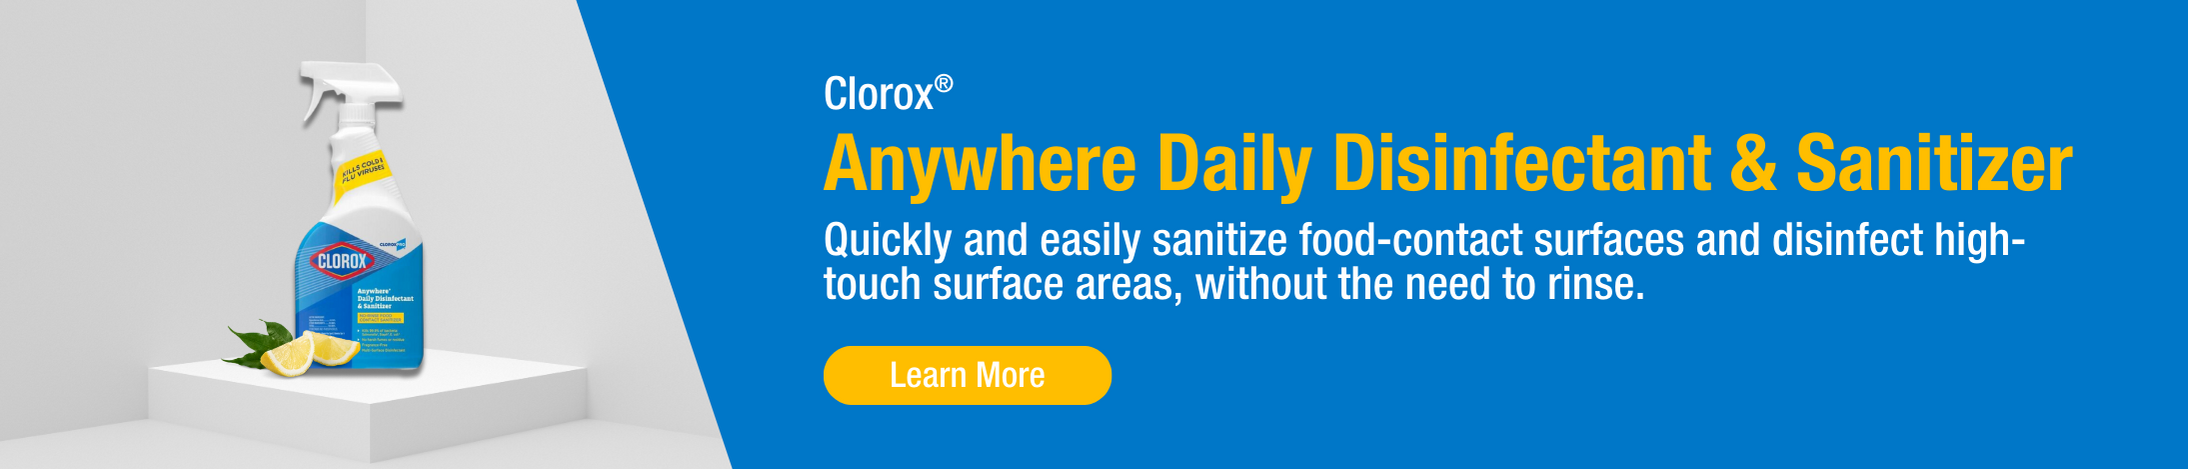 Clorox Anywhere Daily Disinfectant & Sanitizer bottle on a product stand, with copy that reads quickly and easily sanitize food-contact surfaces and disinfect high-touch surface areas, without the need to rinse